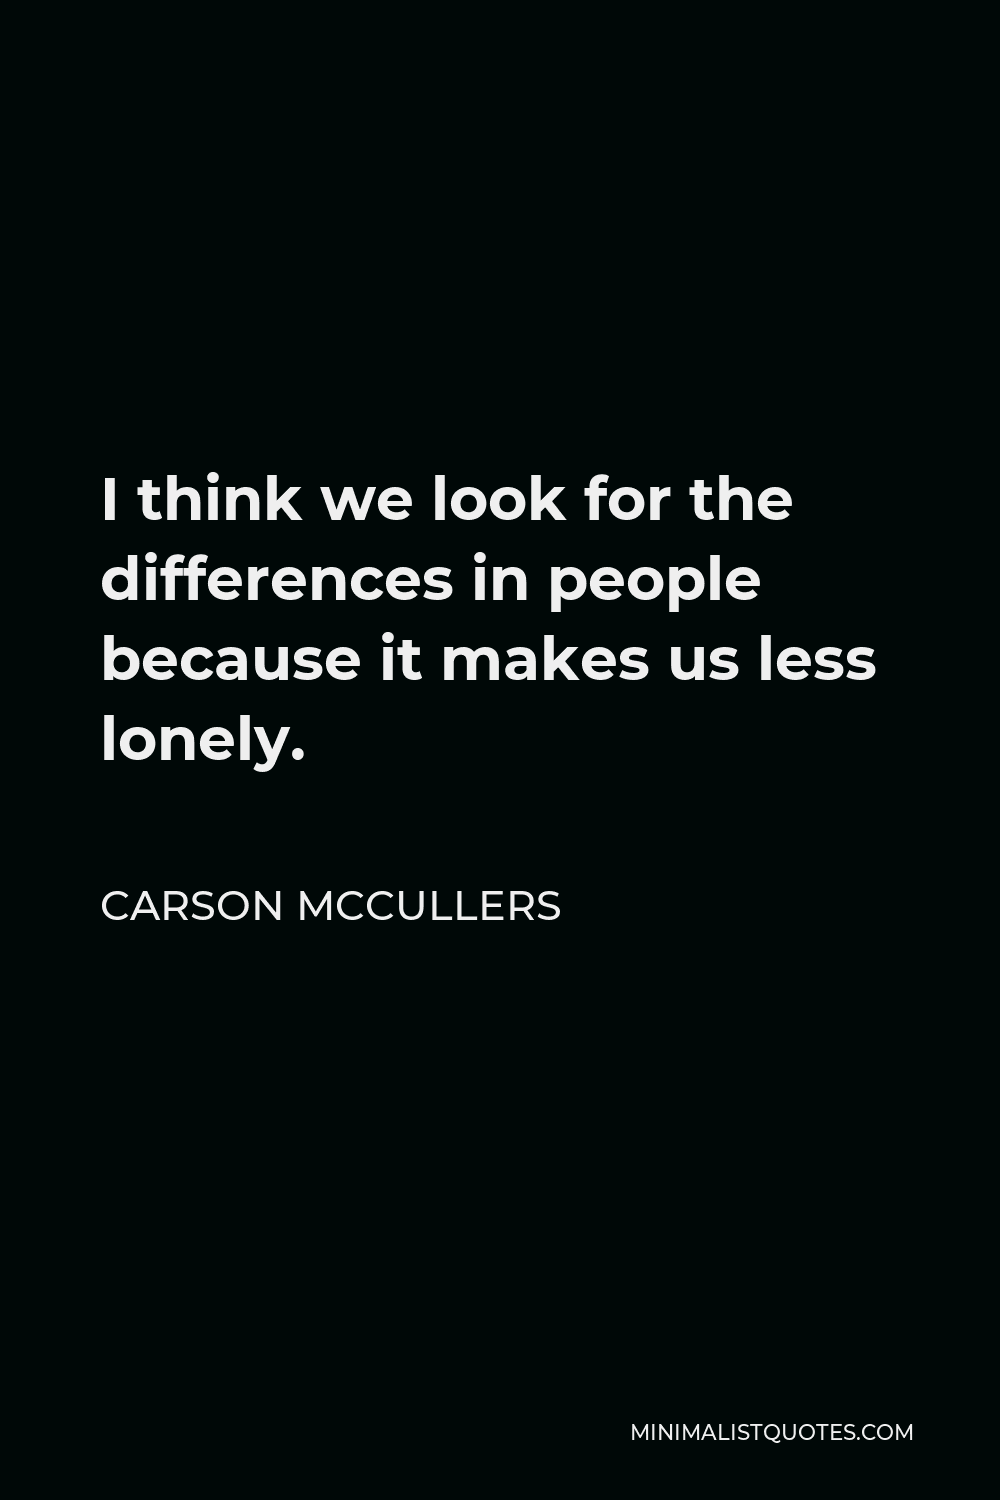 Carson McCullers Quote - I think we look for the differences in people because it makes us less lonely.